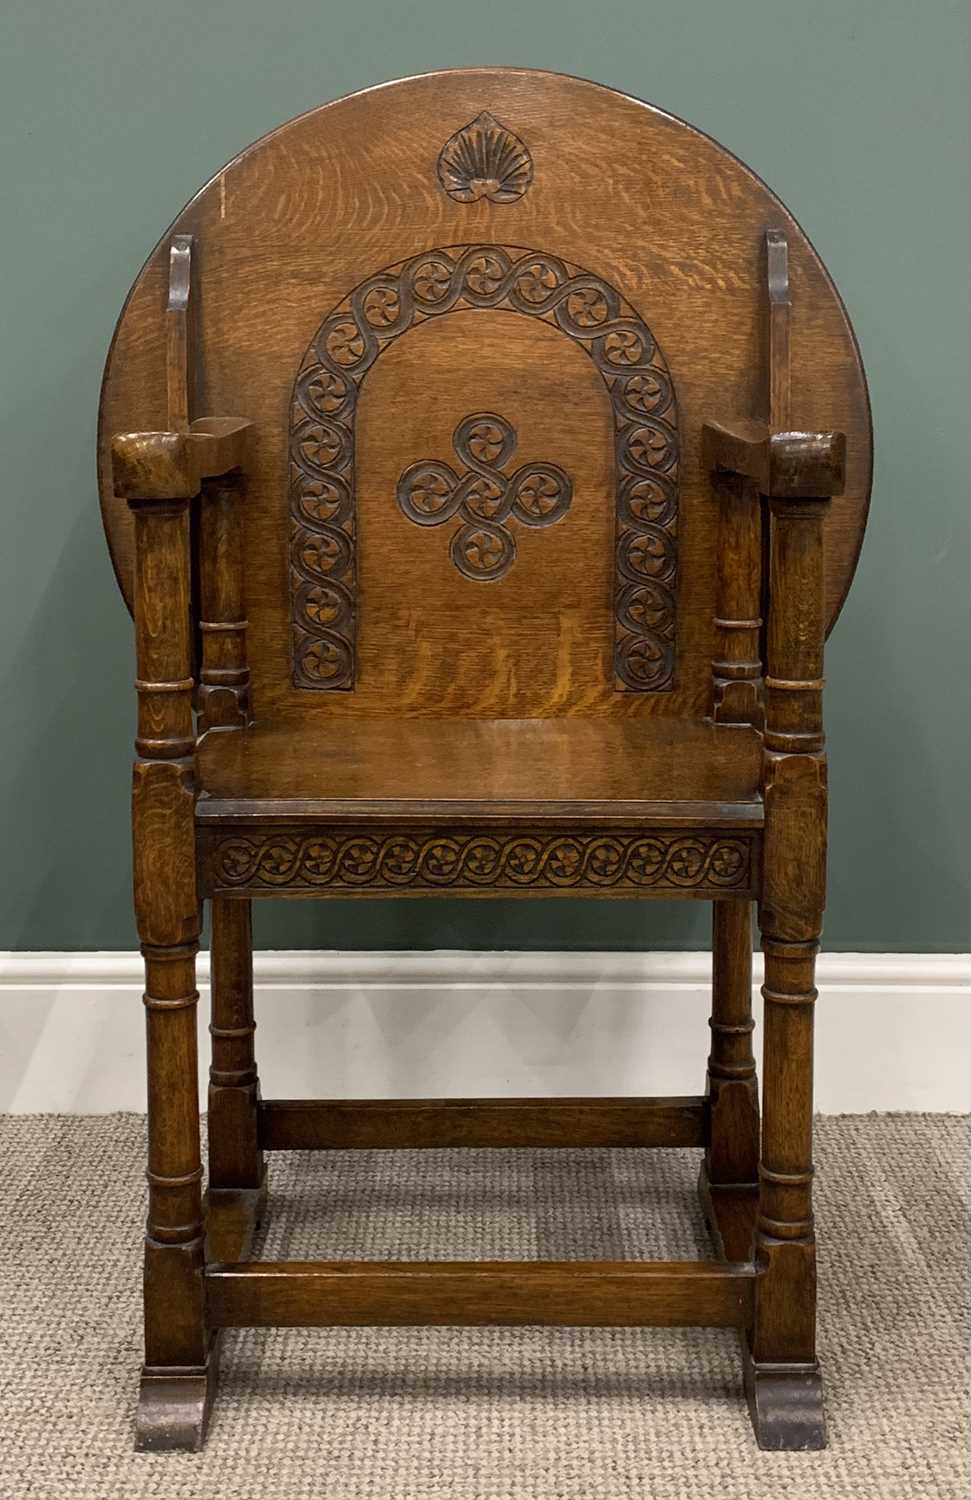 EARLY 20th CENTURY OAK MONK'S BENCH/CHAIR with circular carved top, 74 (h) x 69 (diam) cms